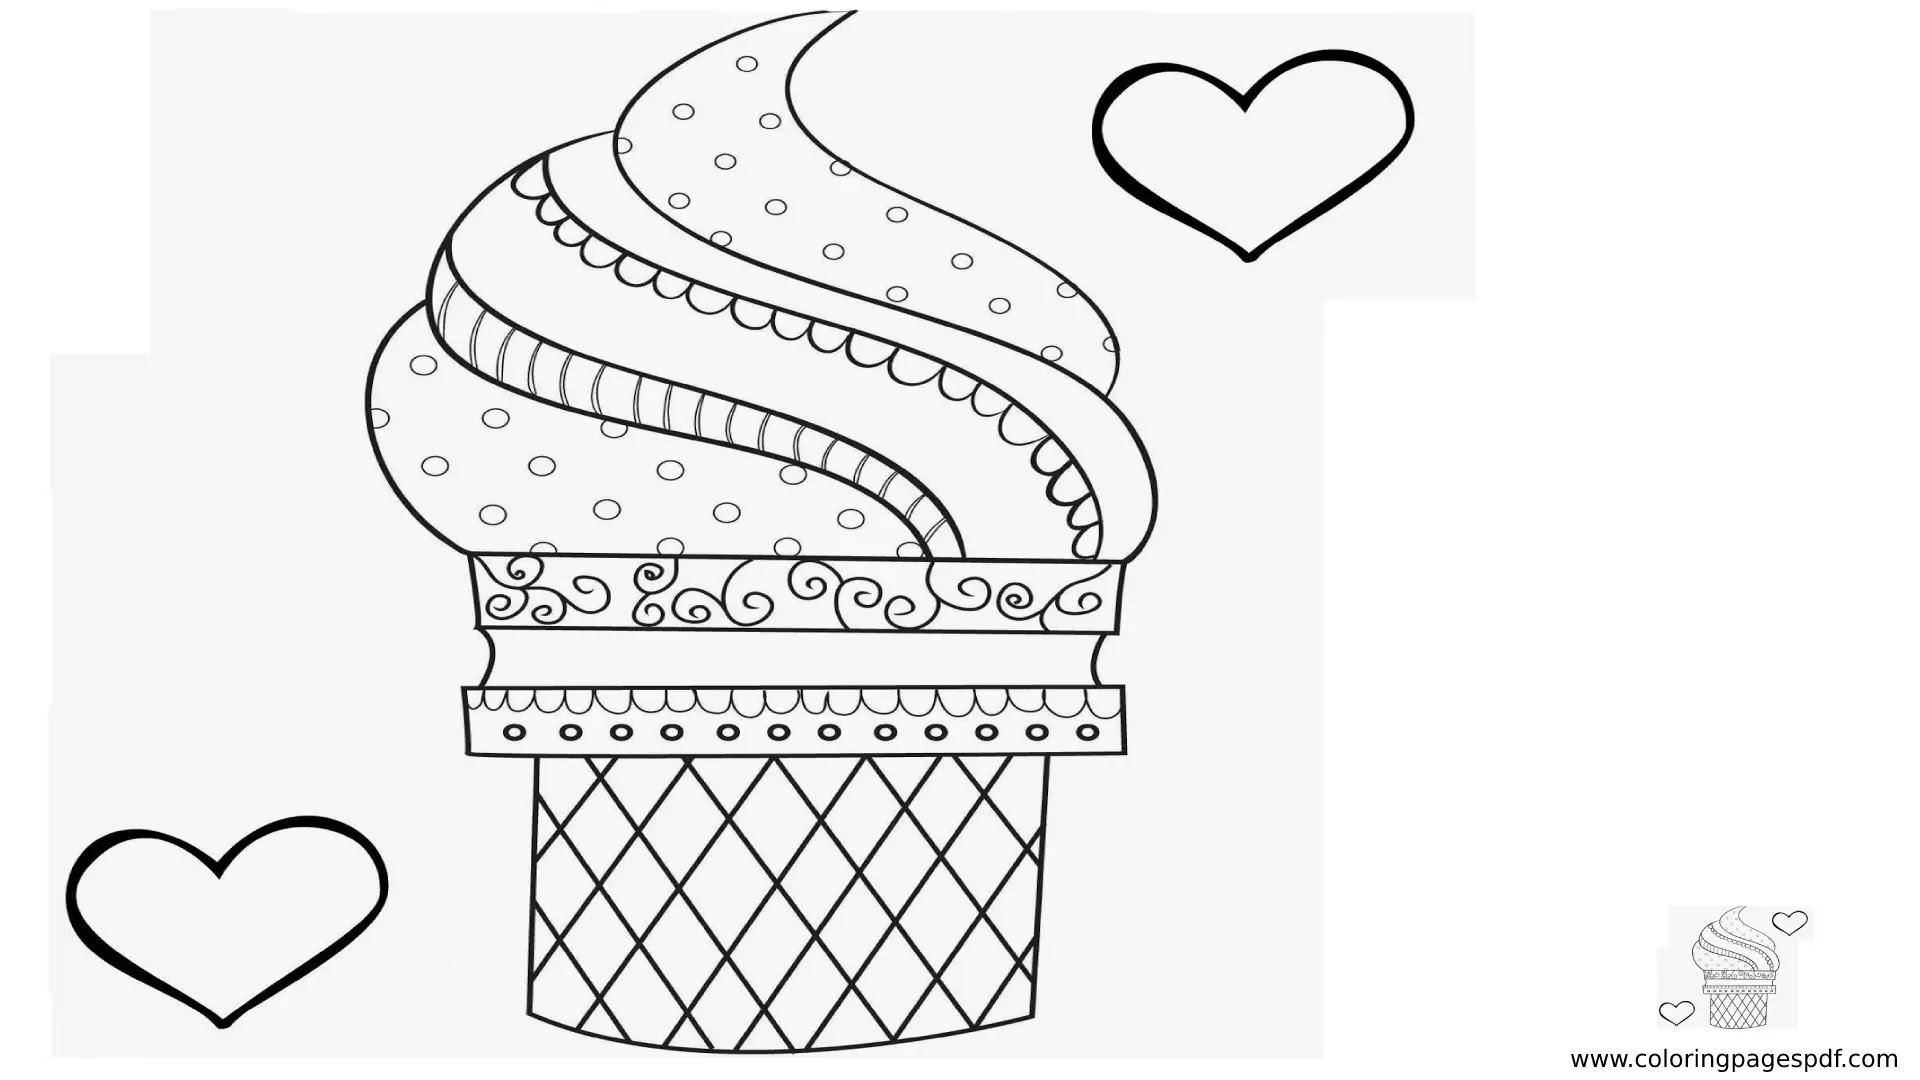 Coloring Pages Of An Ice Cream Cone Mandala